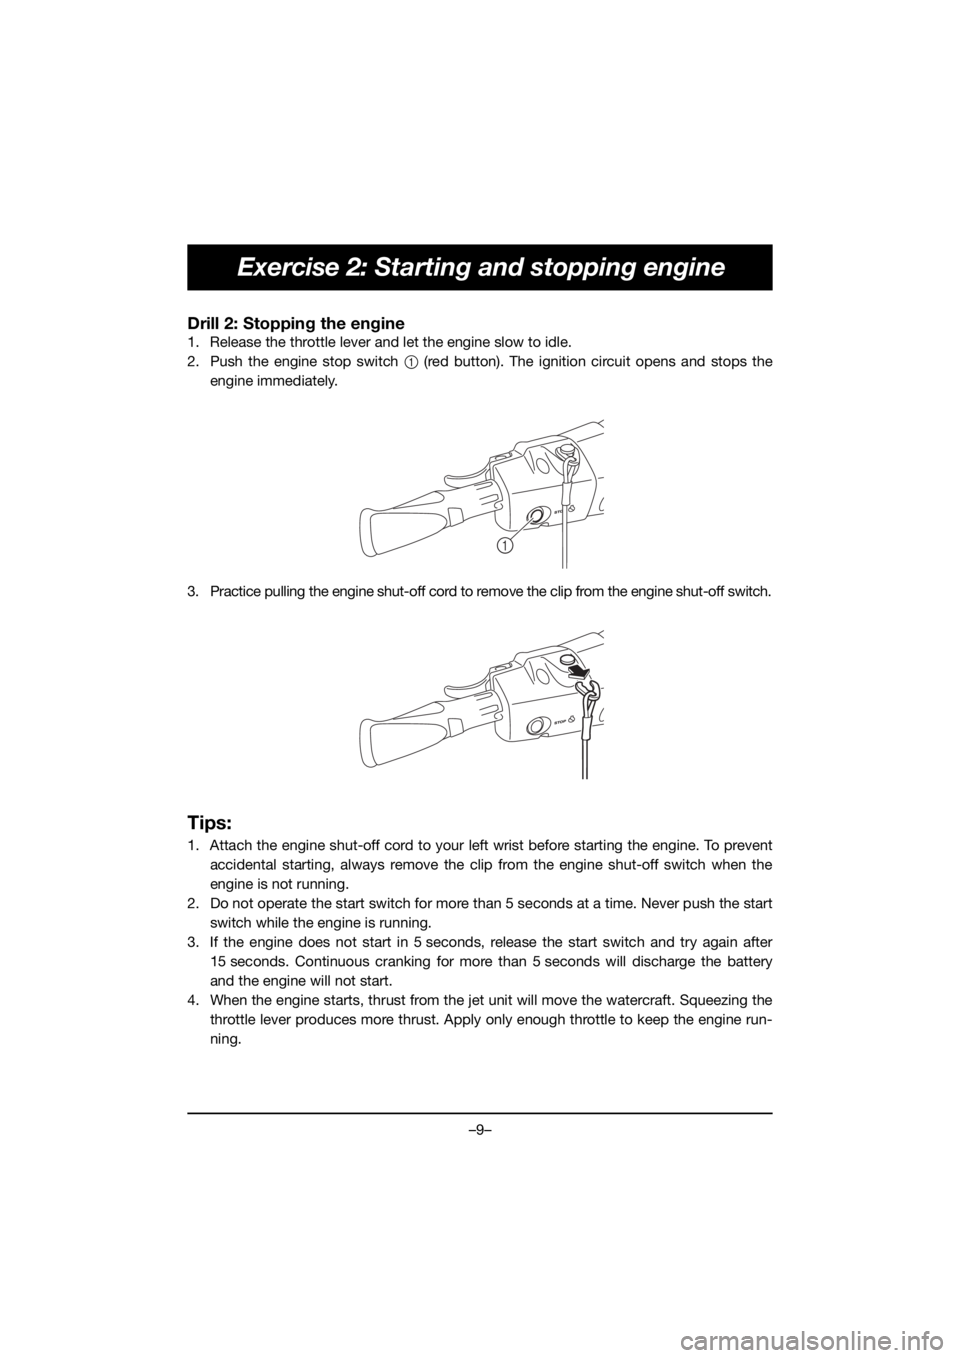 YAMAHA EXR 2020  Bruksanvisningar (in Swedish) –9–
Exercise 2: Starting and stopping engine
Drill 2: Stopping the engine
1. Release the throttle lever and let the engine slow to idle.
2. Push the engine stop switch 1 (red button). The ignition